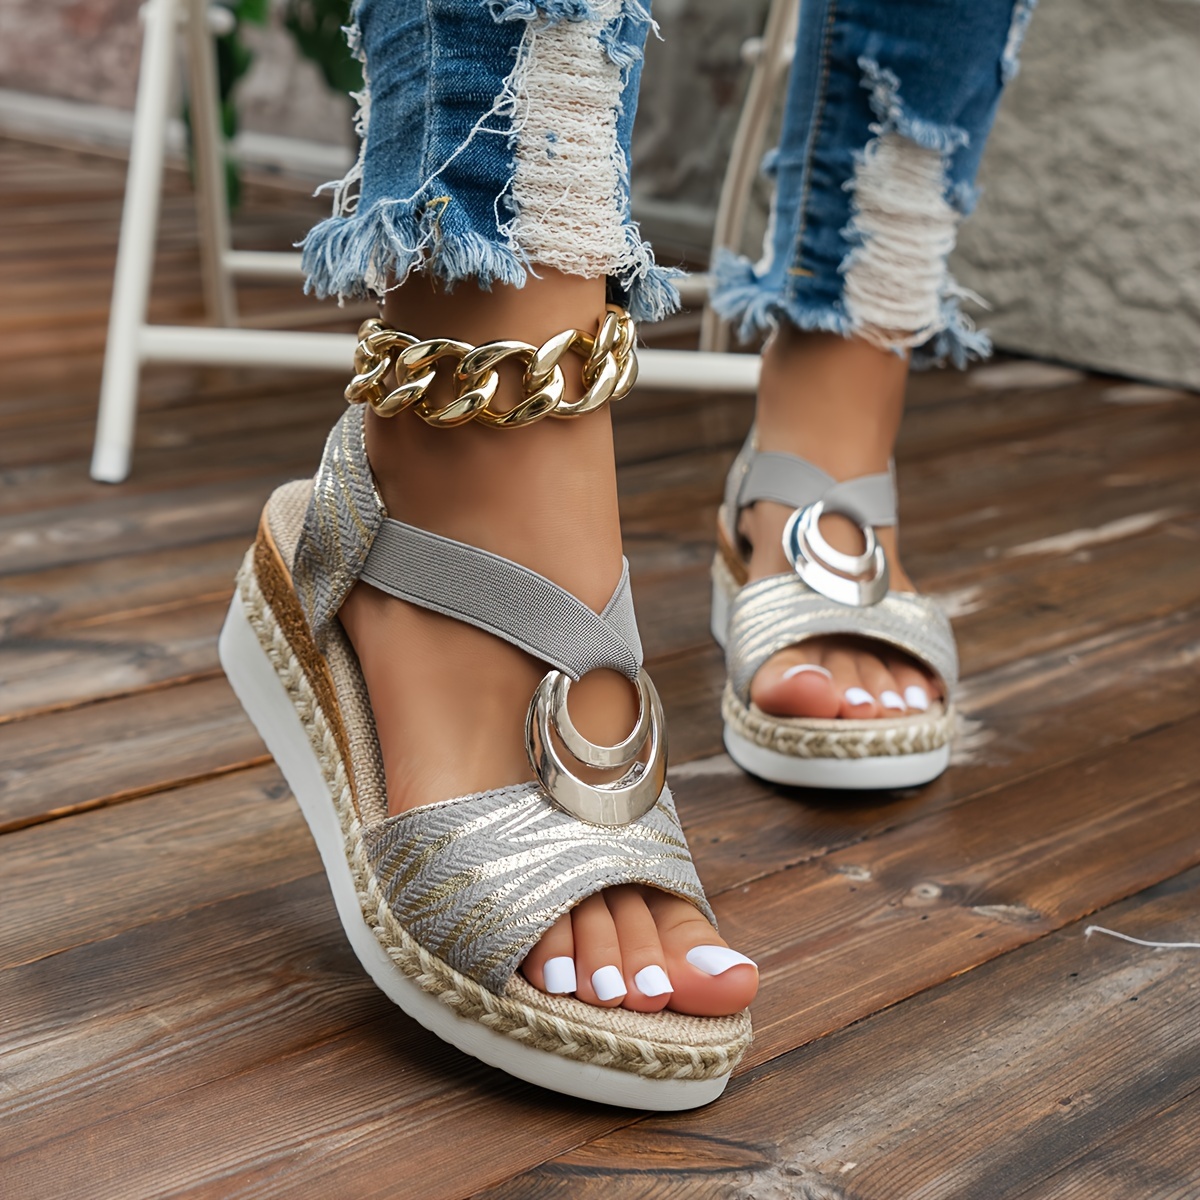 

Women's Wedge Heeled Sandals, Casual Open Toe Platform Shoes, Summer Ankle Strap Sandals